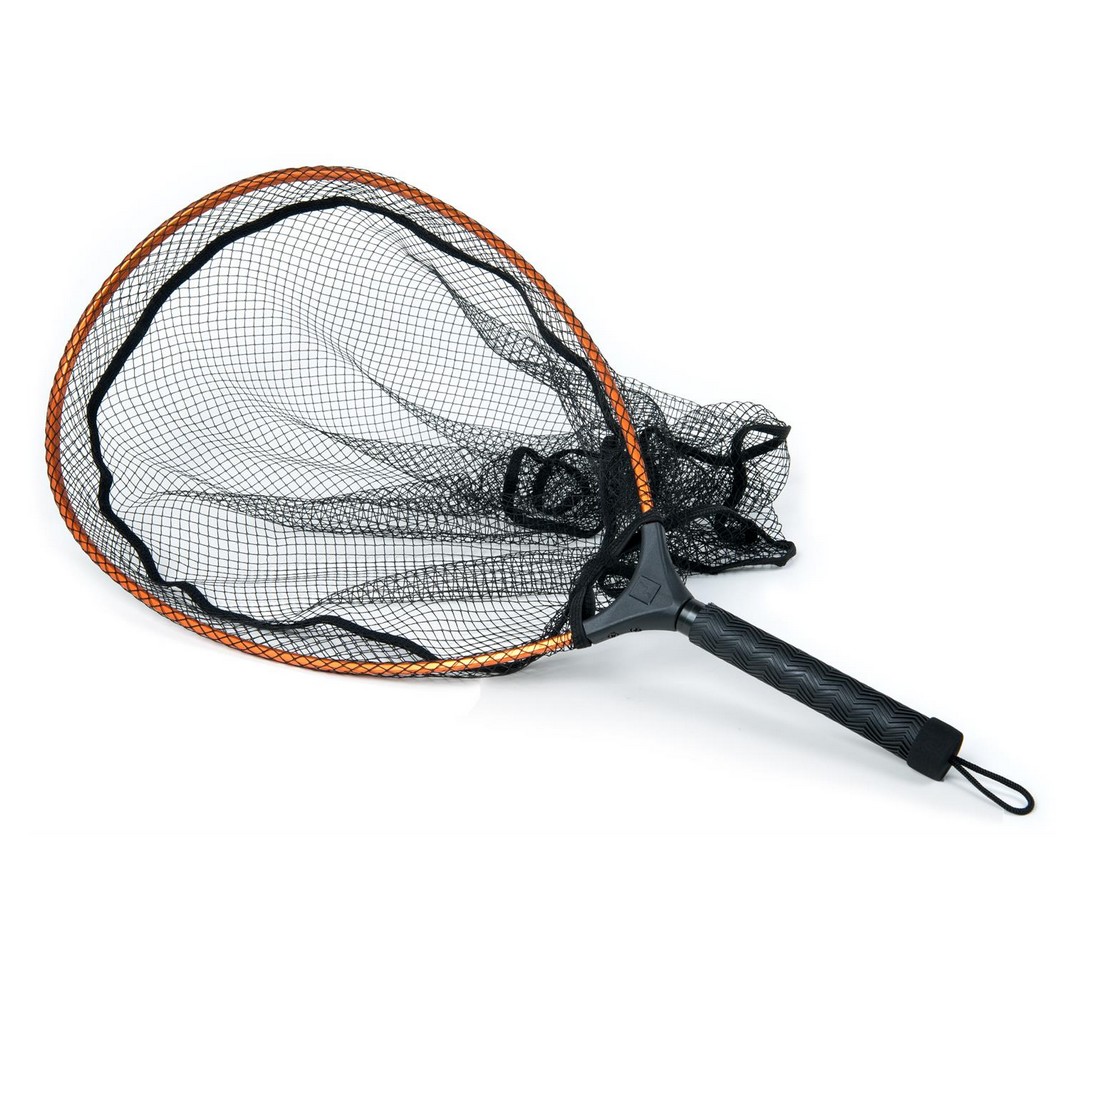 MULTI GRIP LANDING NET MESH LARGE Guideline G-105972 : Fly-fishing shop,  fly rods, reels, fly tying, customers best rated